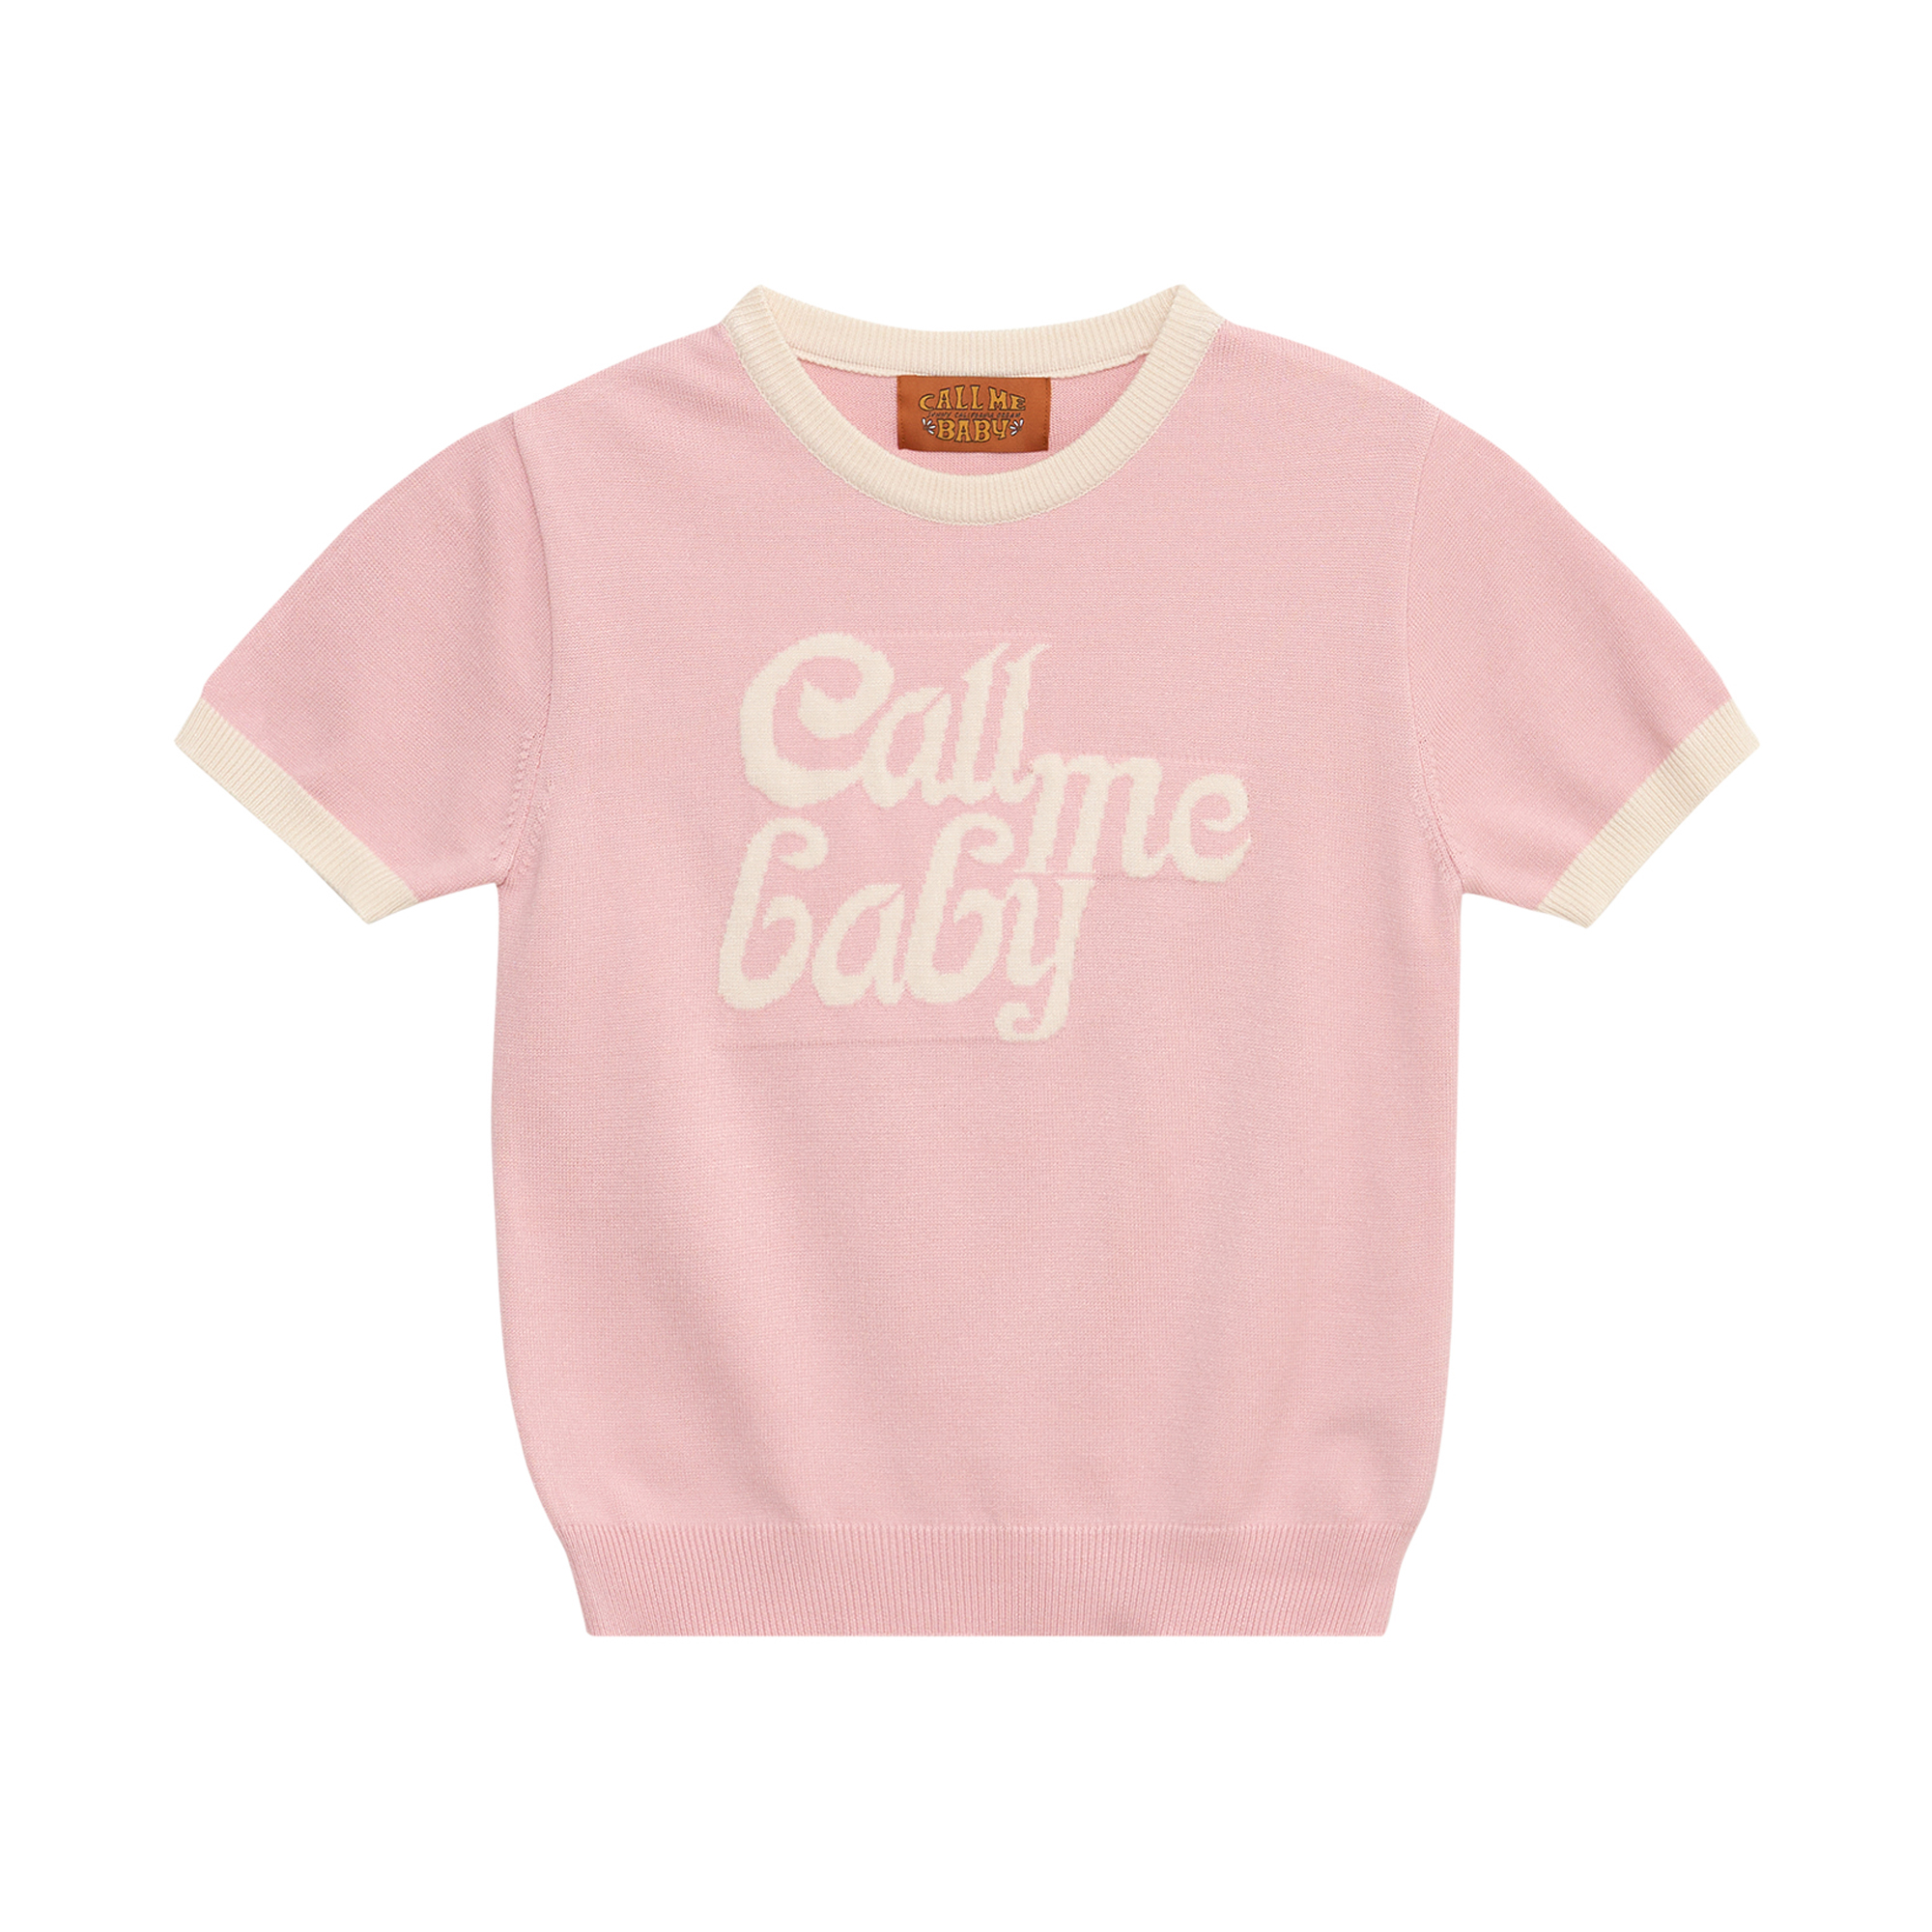 [Call Me Baby] Baby Ringer  knit _ Pink/White